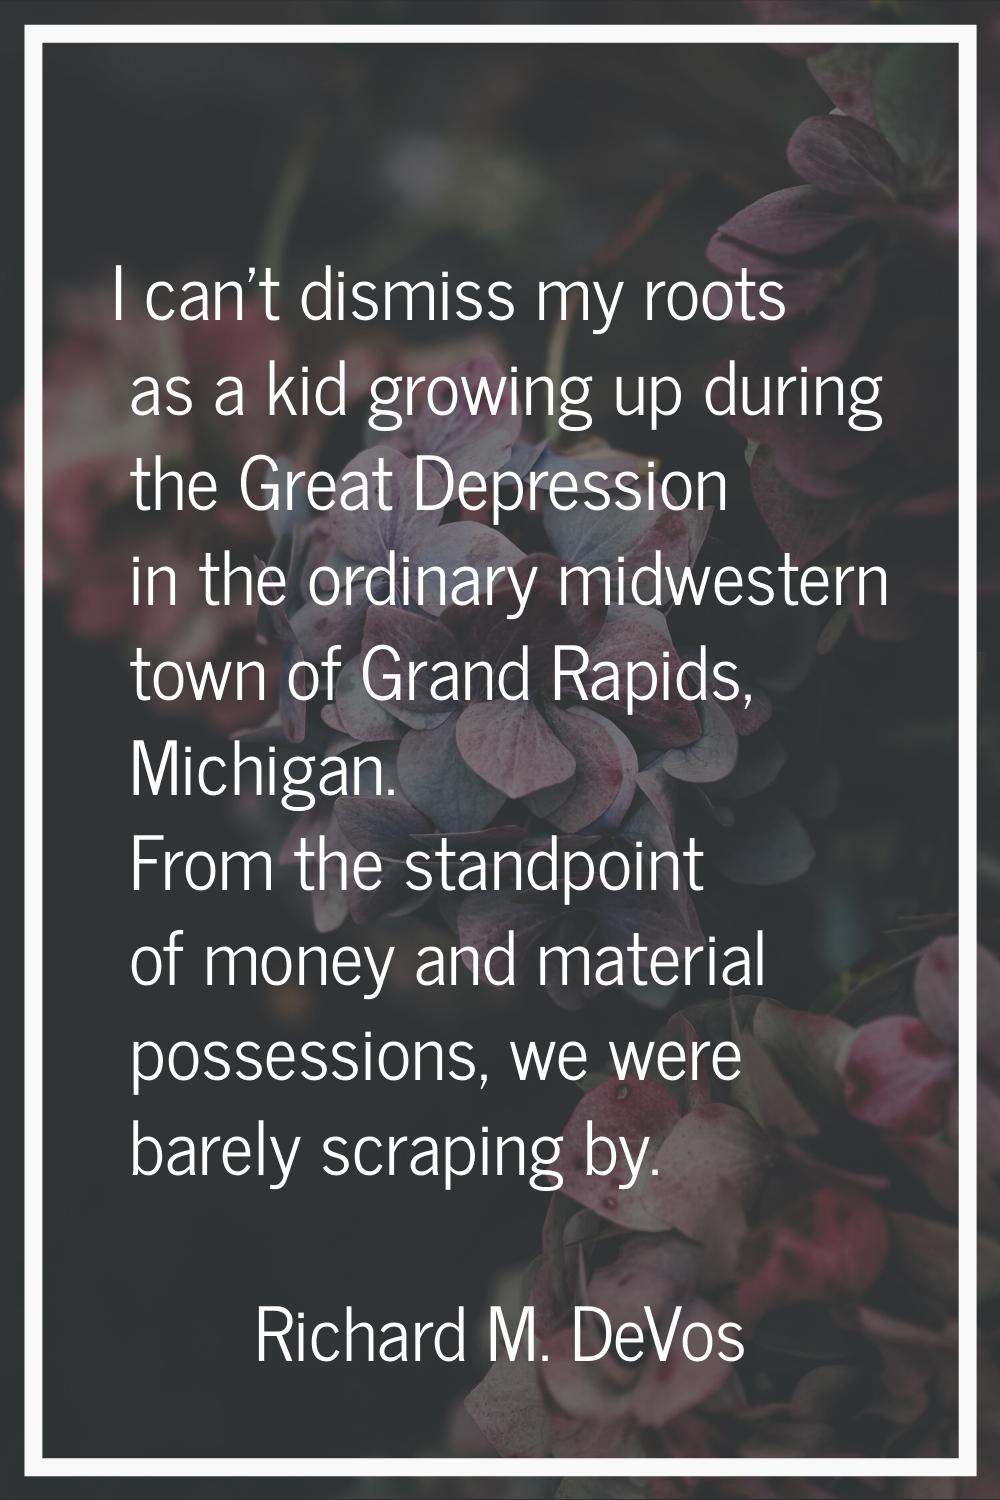 I can't dismiss my roots as a kid growing up during the Great Depression in the ordinary midwestern